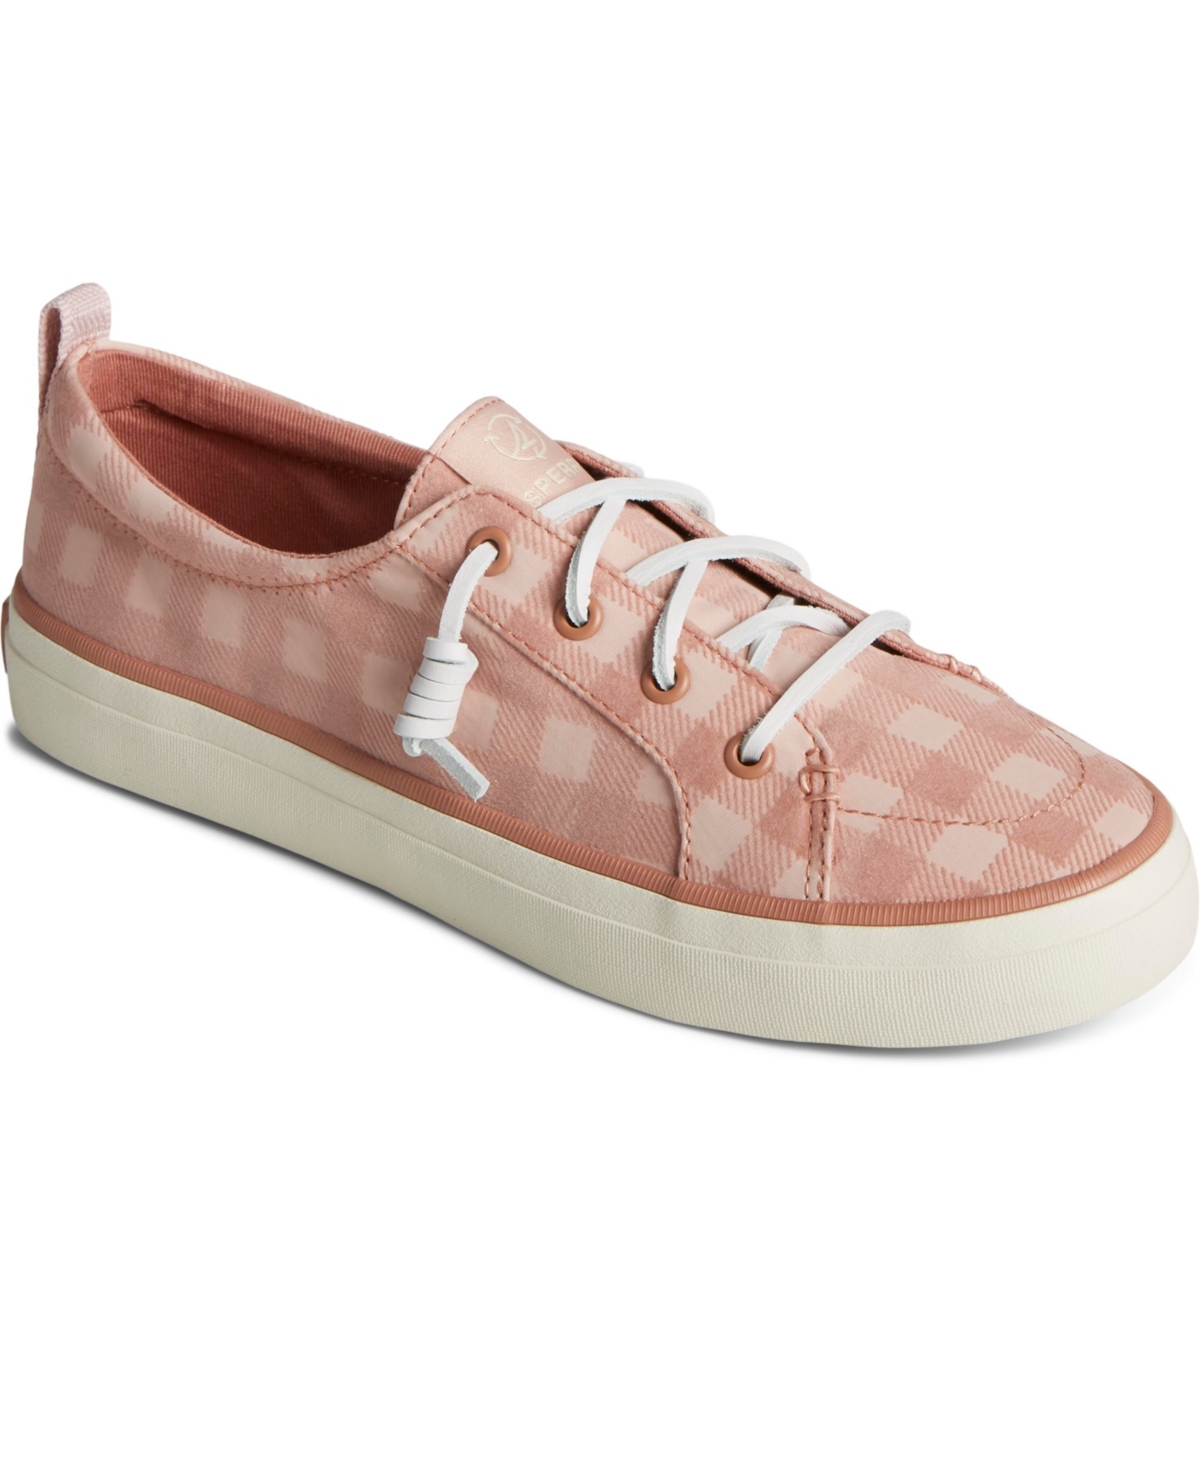 Women's Crest Vibe Gingham Canvas Sneakers, Created for Macy's - Medium Pink